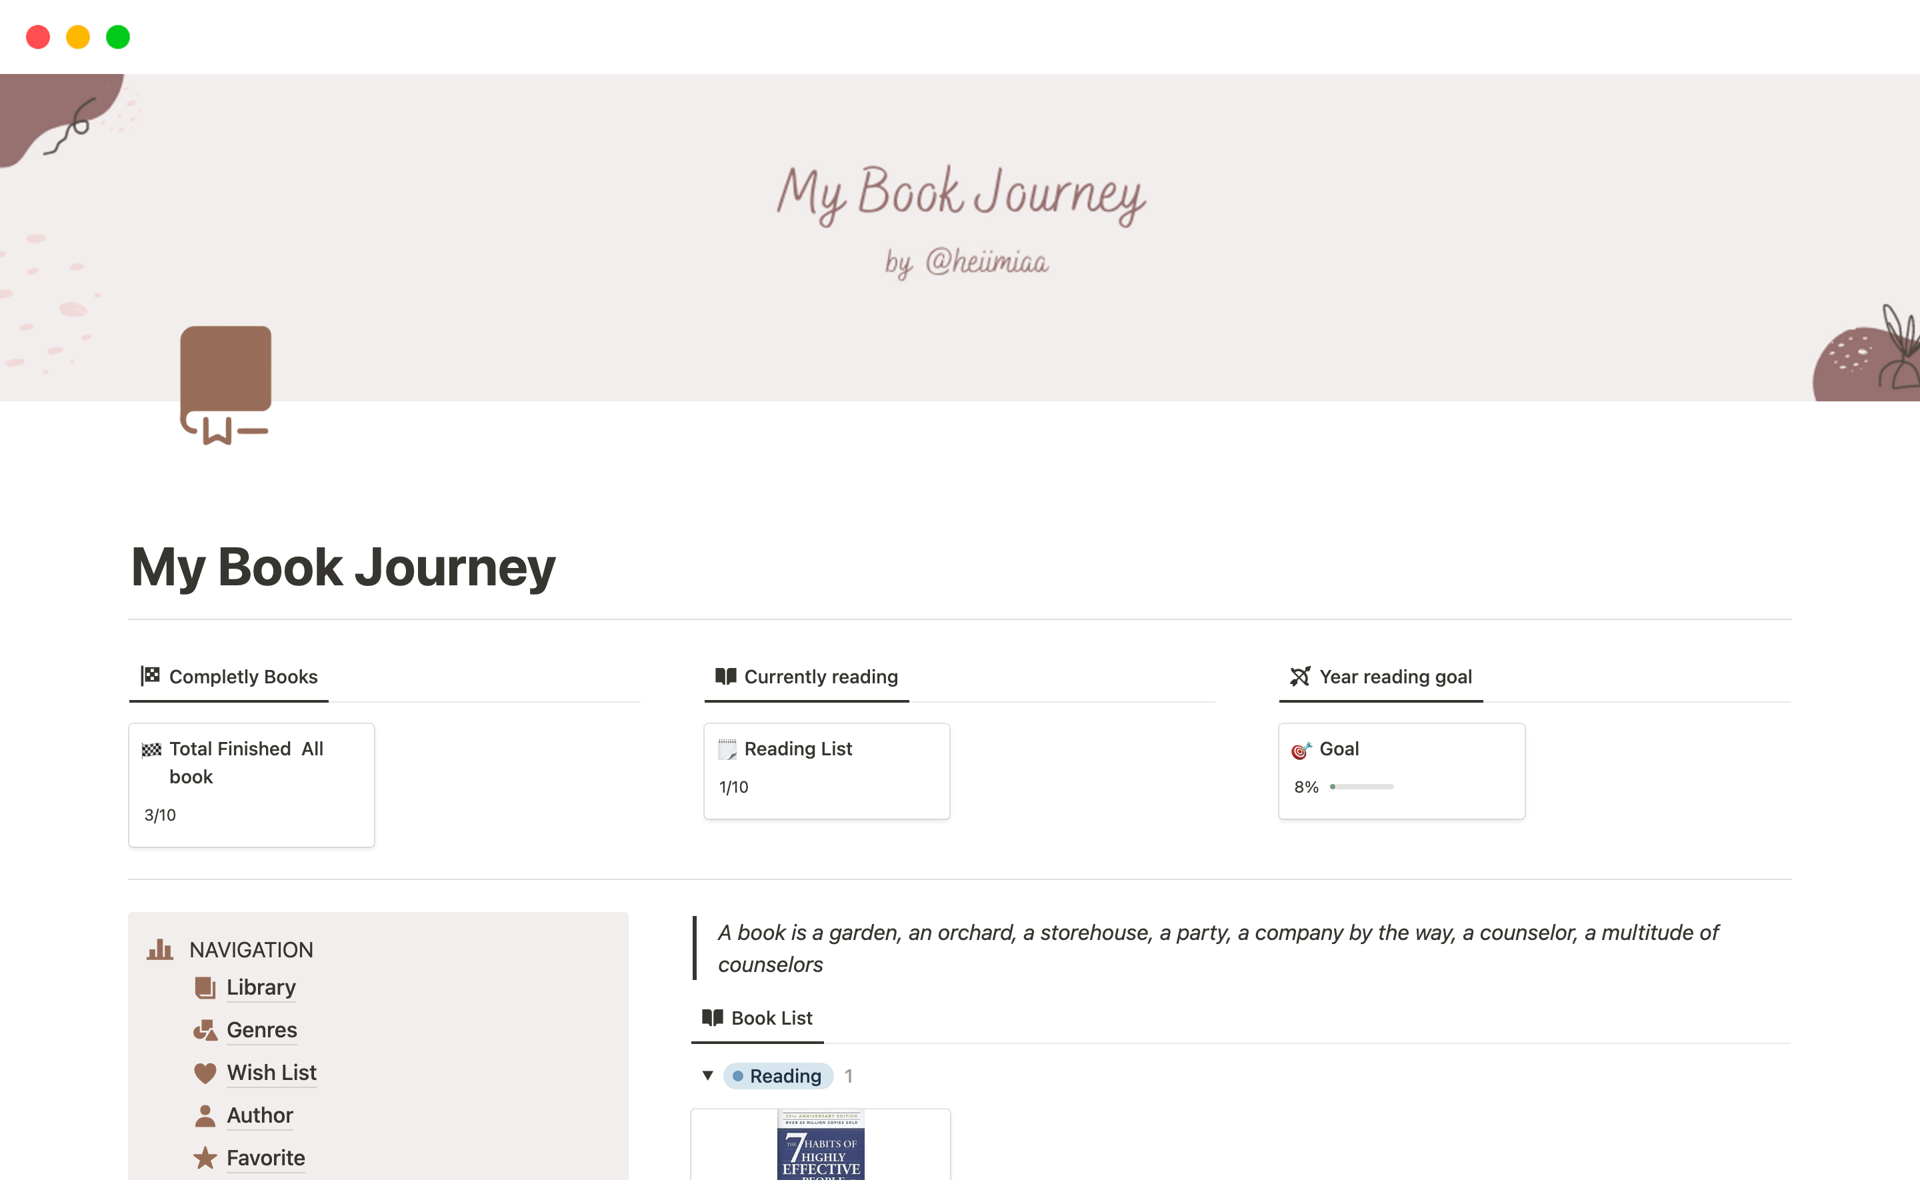 My book Journey is designed to help book lovers organize and manage their reading journey in a systematic and delightful way. 